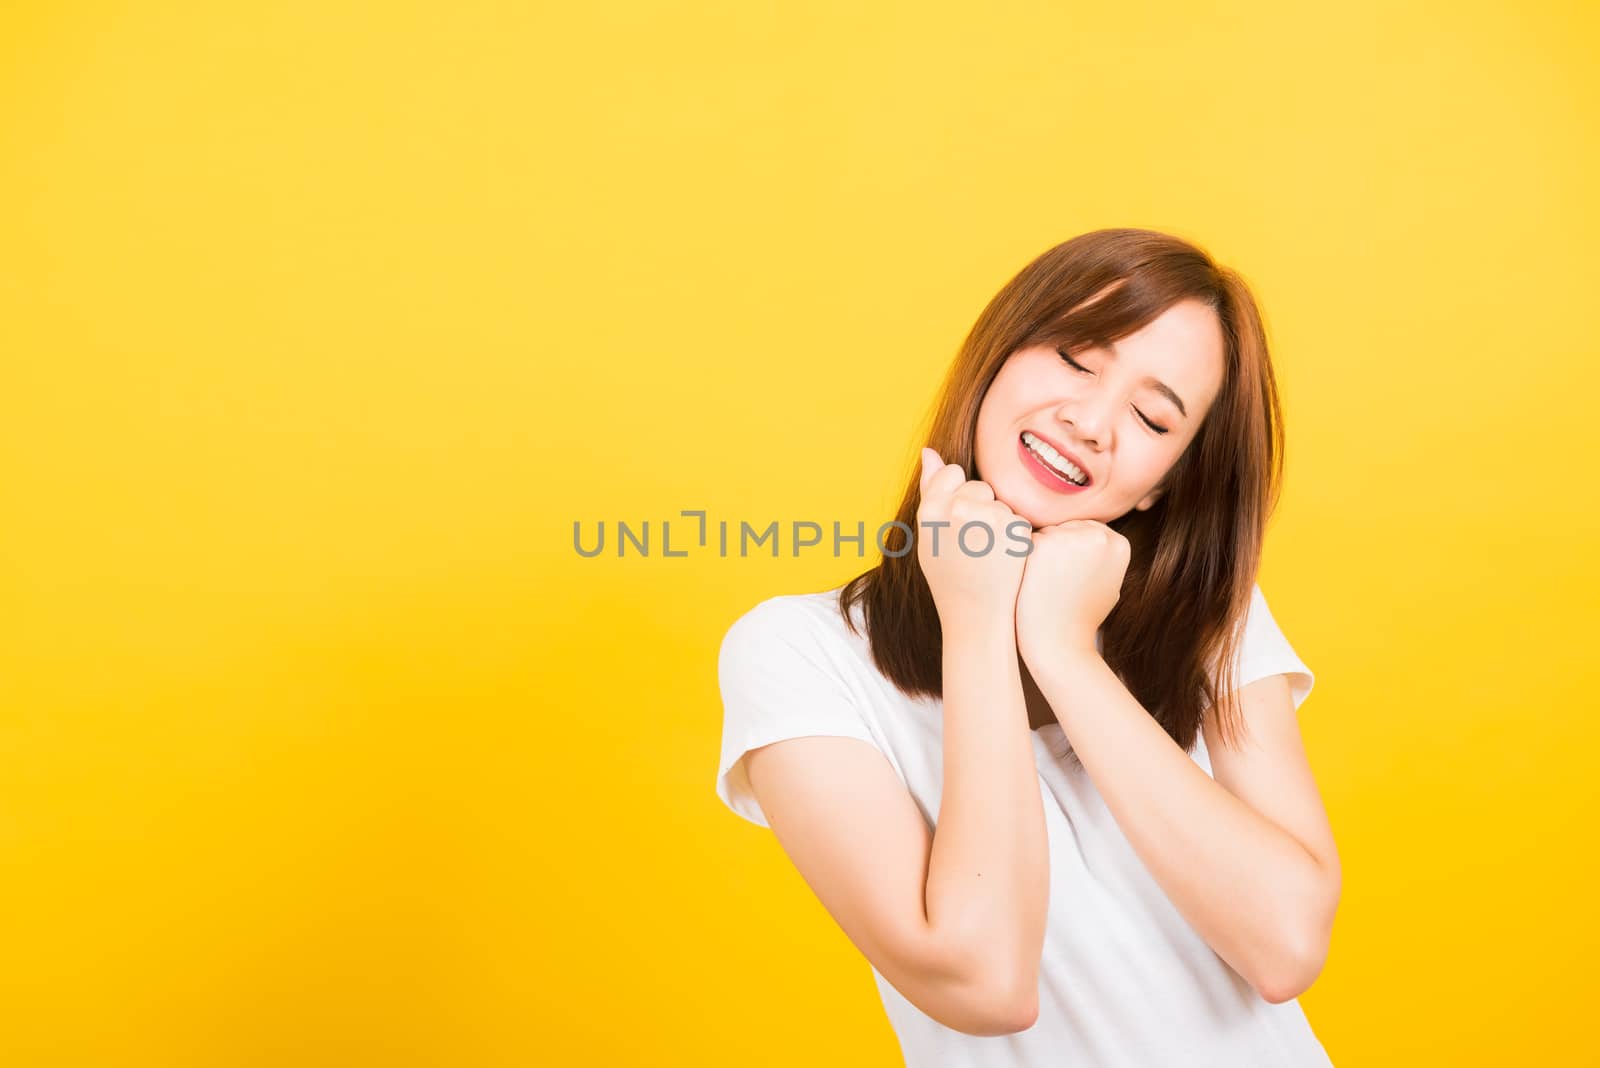 Asian happy portrait beautiful cute young woman teen stand wear t-shirt happy expression fist pressed together under chin and closed eyes isolated, studio shot on yellow background with copy space